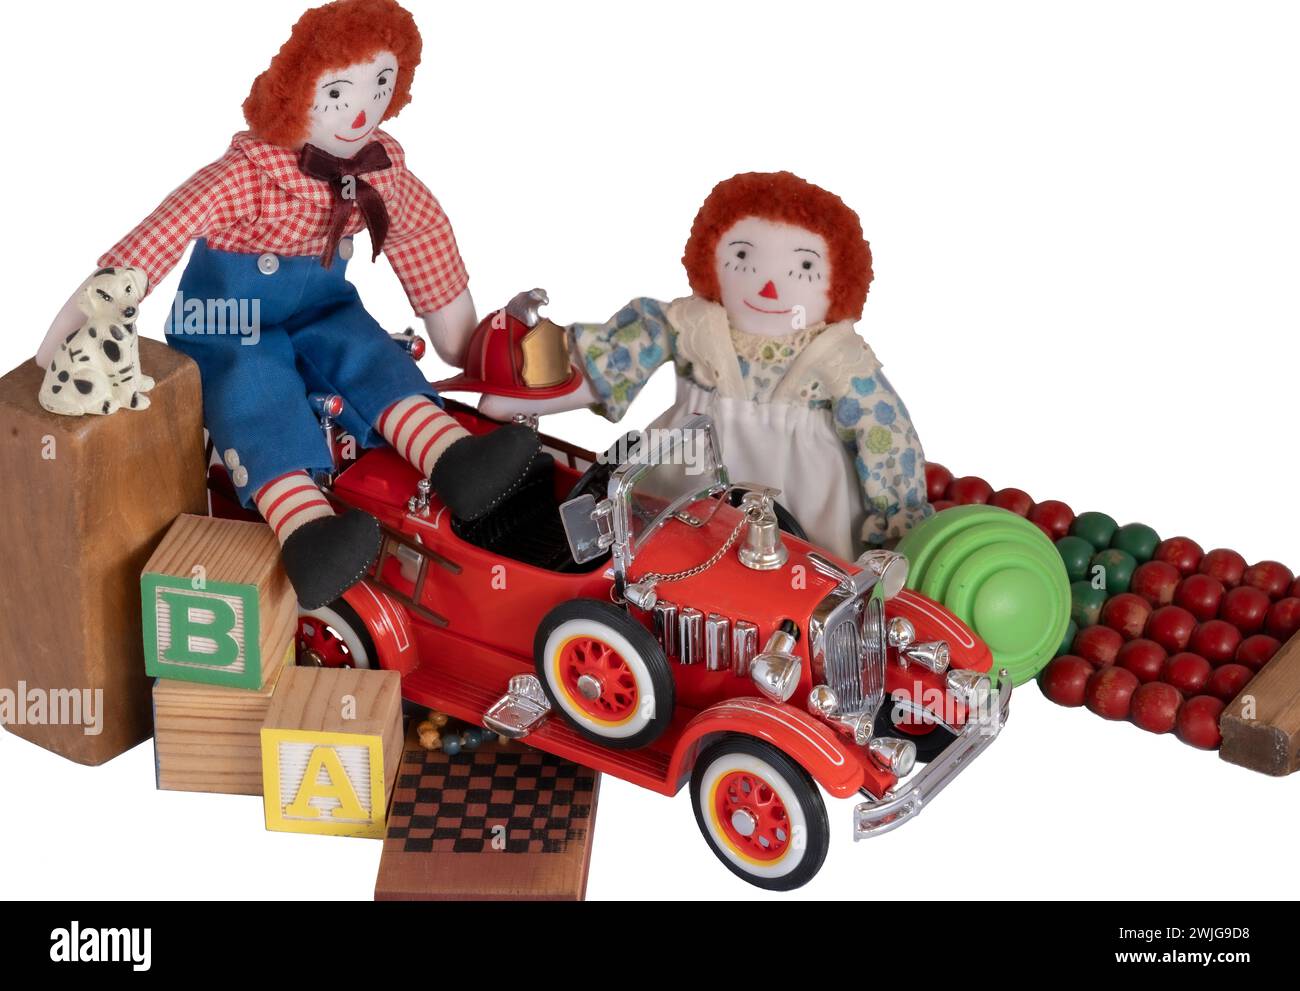 Handmade rag dolls, Raggedy Ann & Andy placed among toys, blocks, fire engine, little dog, fireman hat, old & newer toys in wood and metal. Isolated Stock Photo